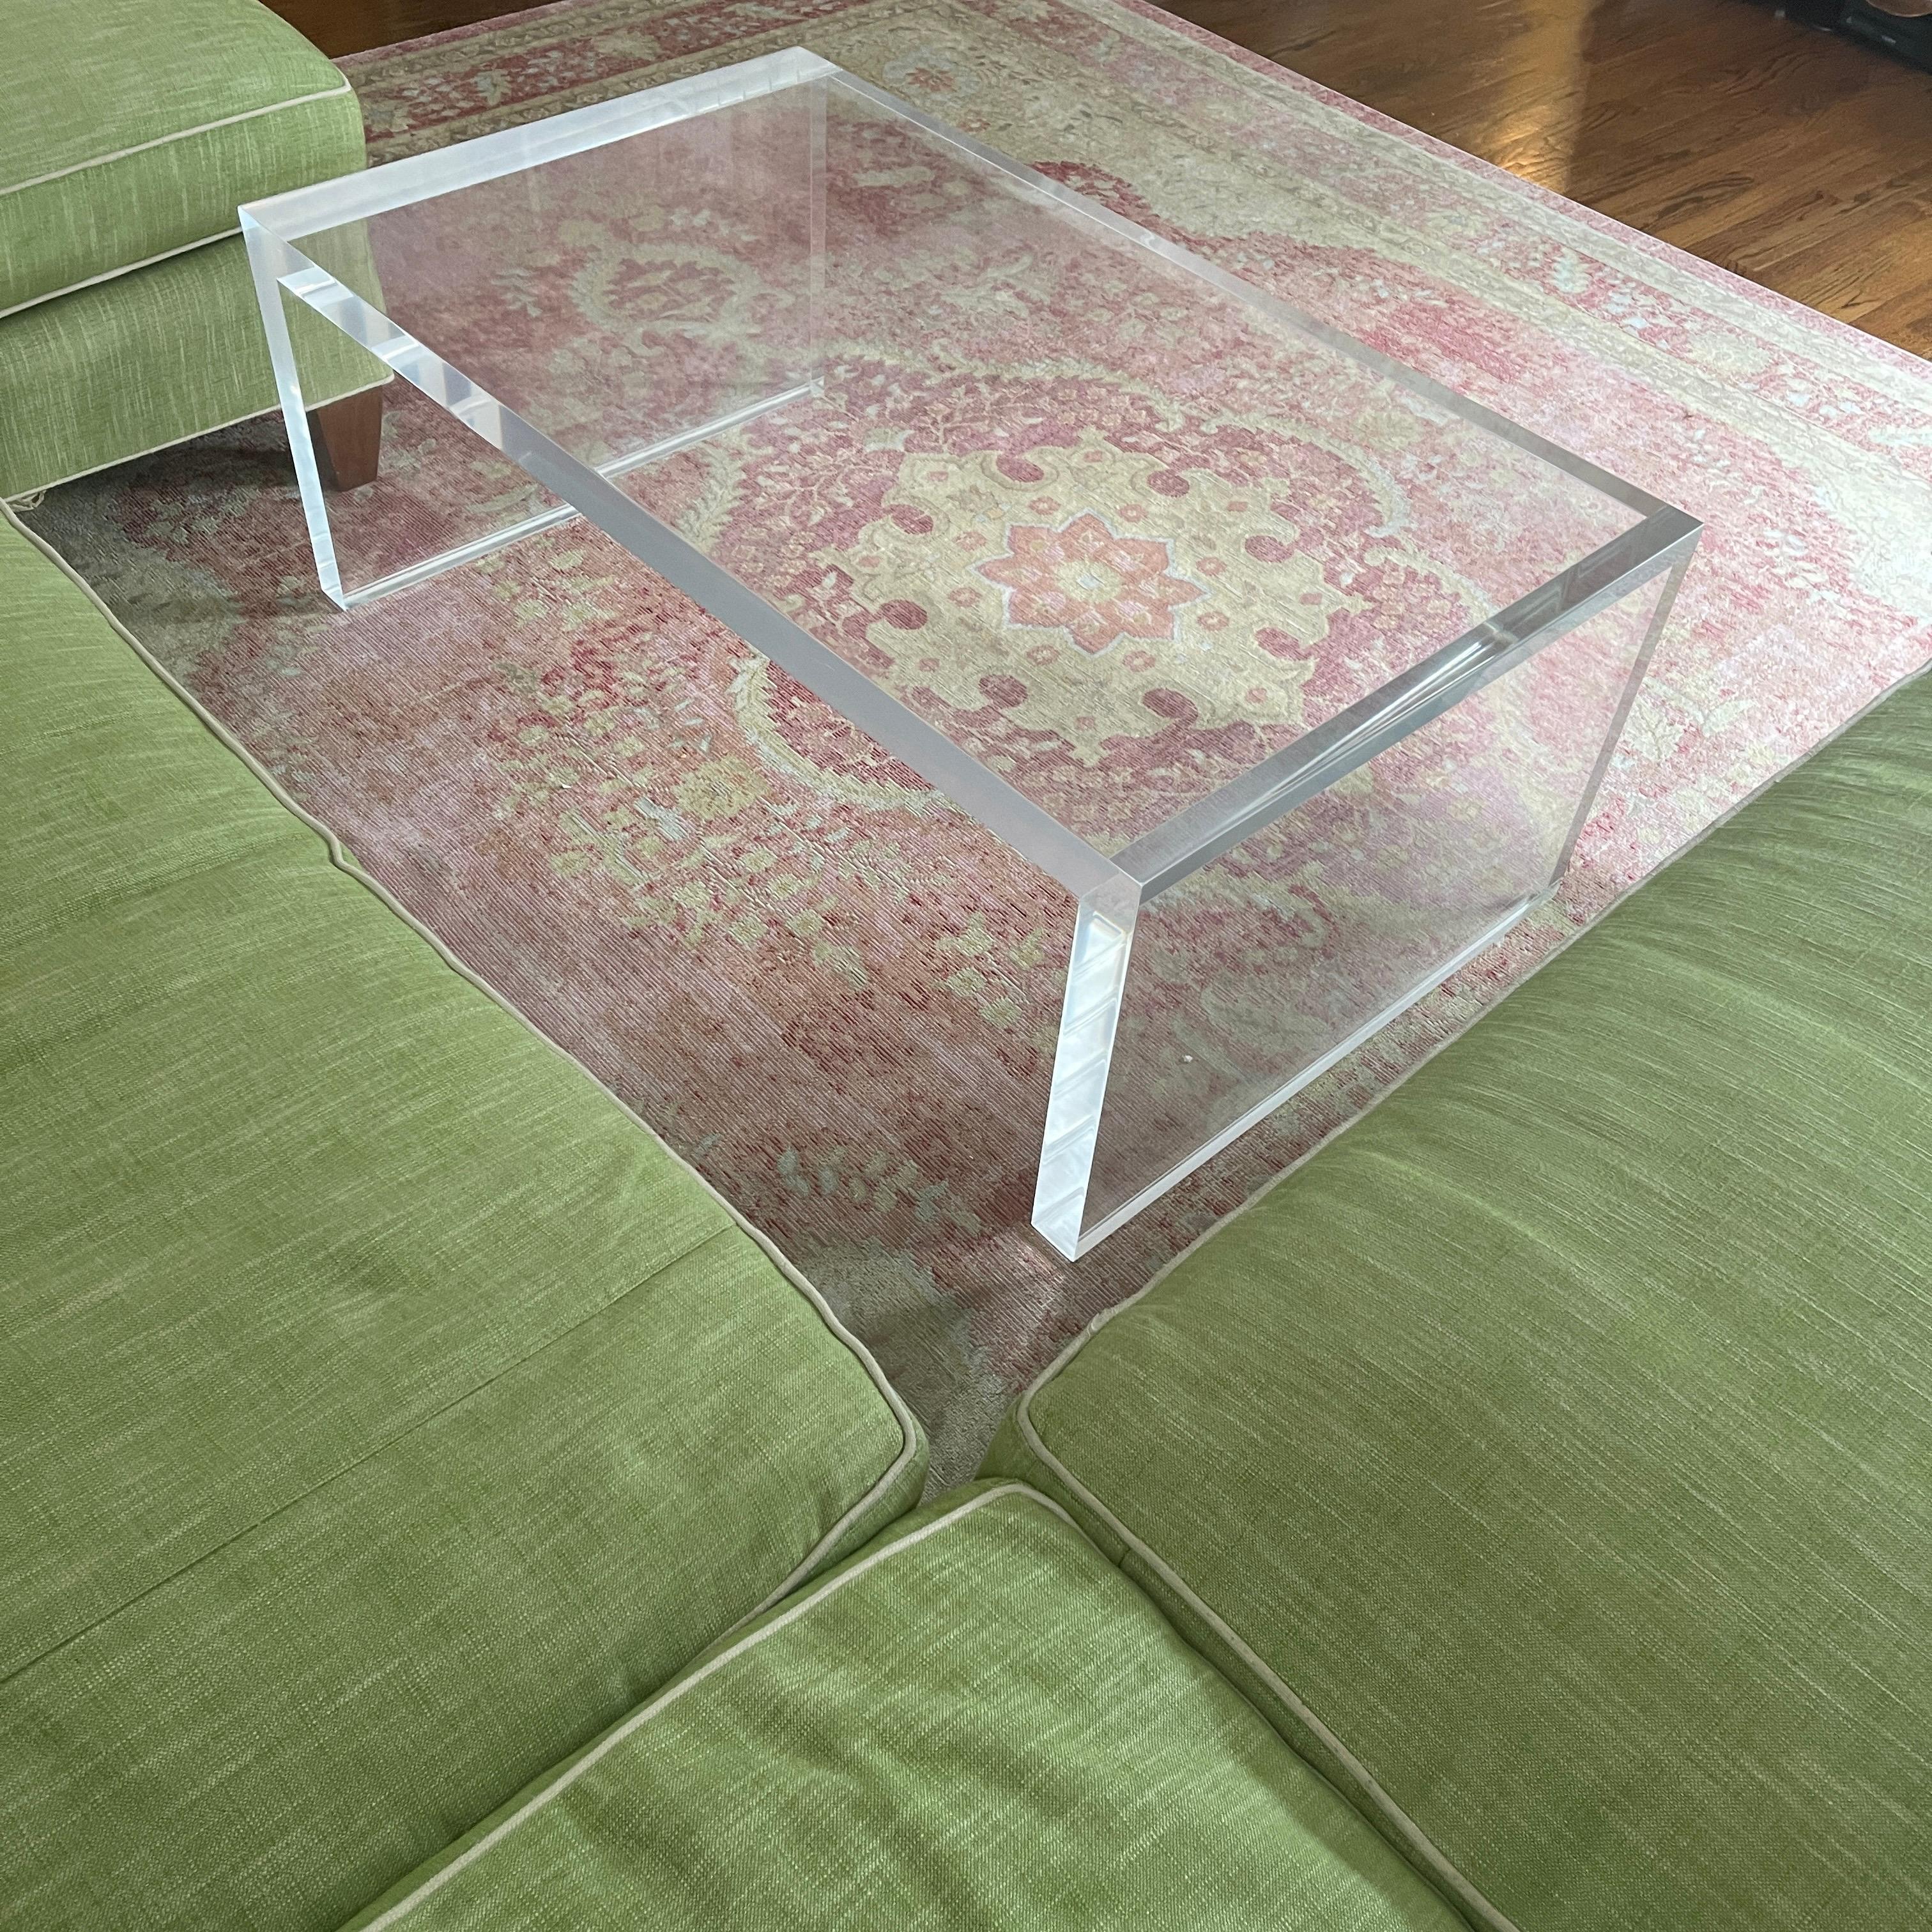 Large Rectangular Thick Lucite Coffee or Cocktail Table Hollis Era 3